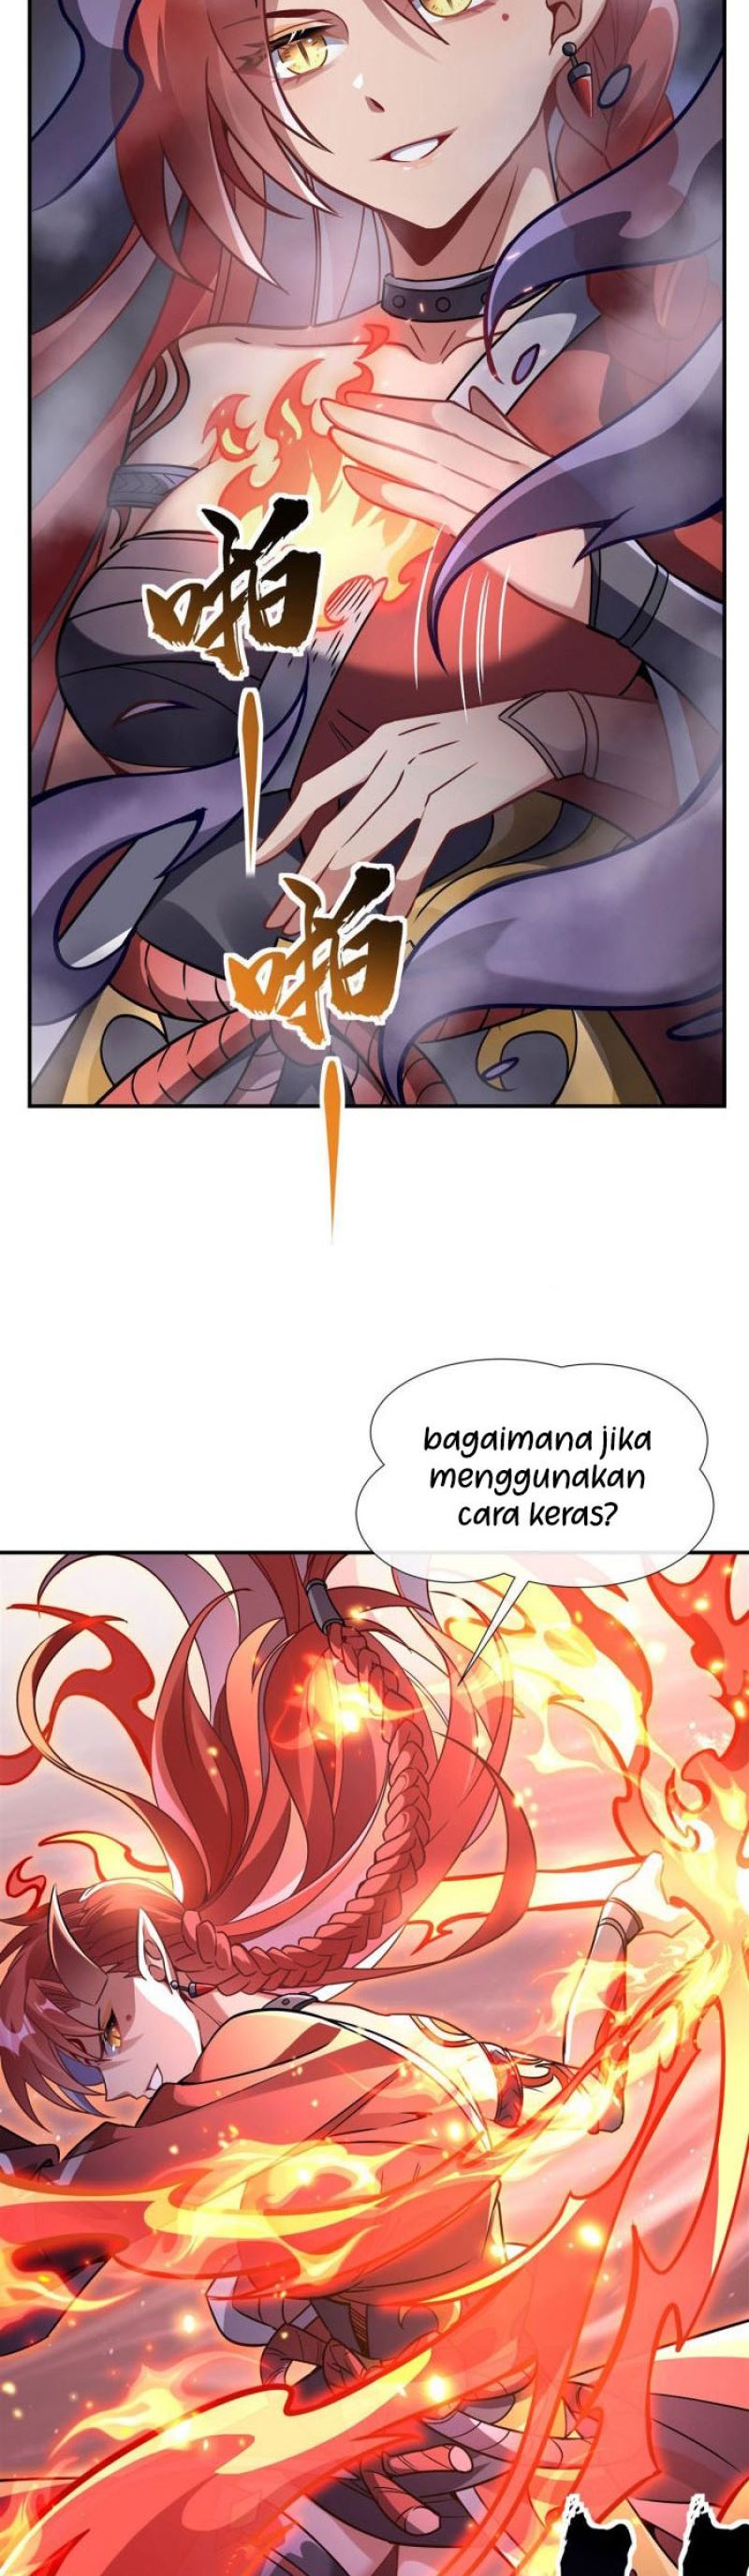 Dilarang COPAS - situs resmi www.mangacanblog.com - Komik my female apprentices are all big shots from the future 115 - chapter 115 116 Indonesia my female apprentices are all big shots from the future 115 - chapter 115 Terbaru 4|Baca Manga Komik Indonesia|Mangacan